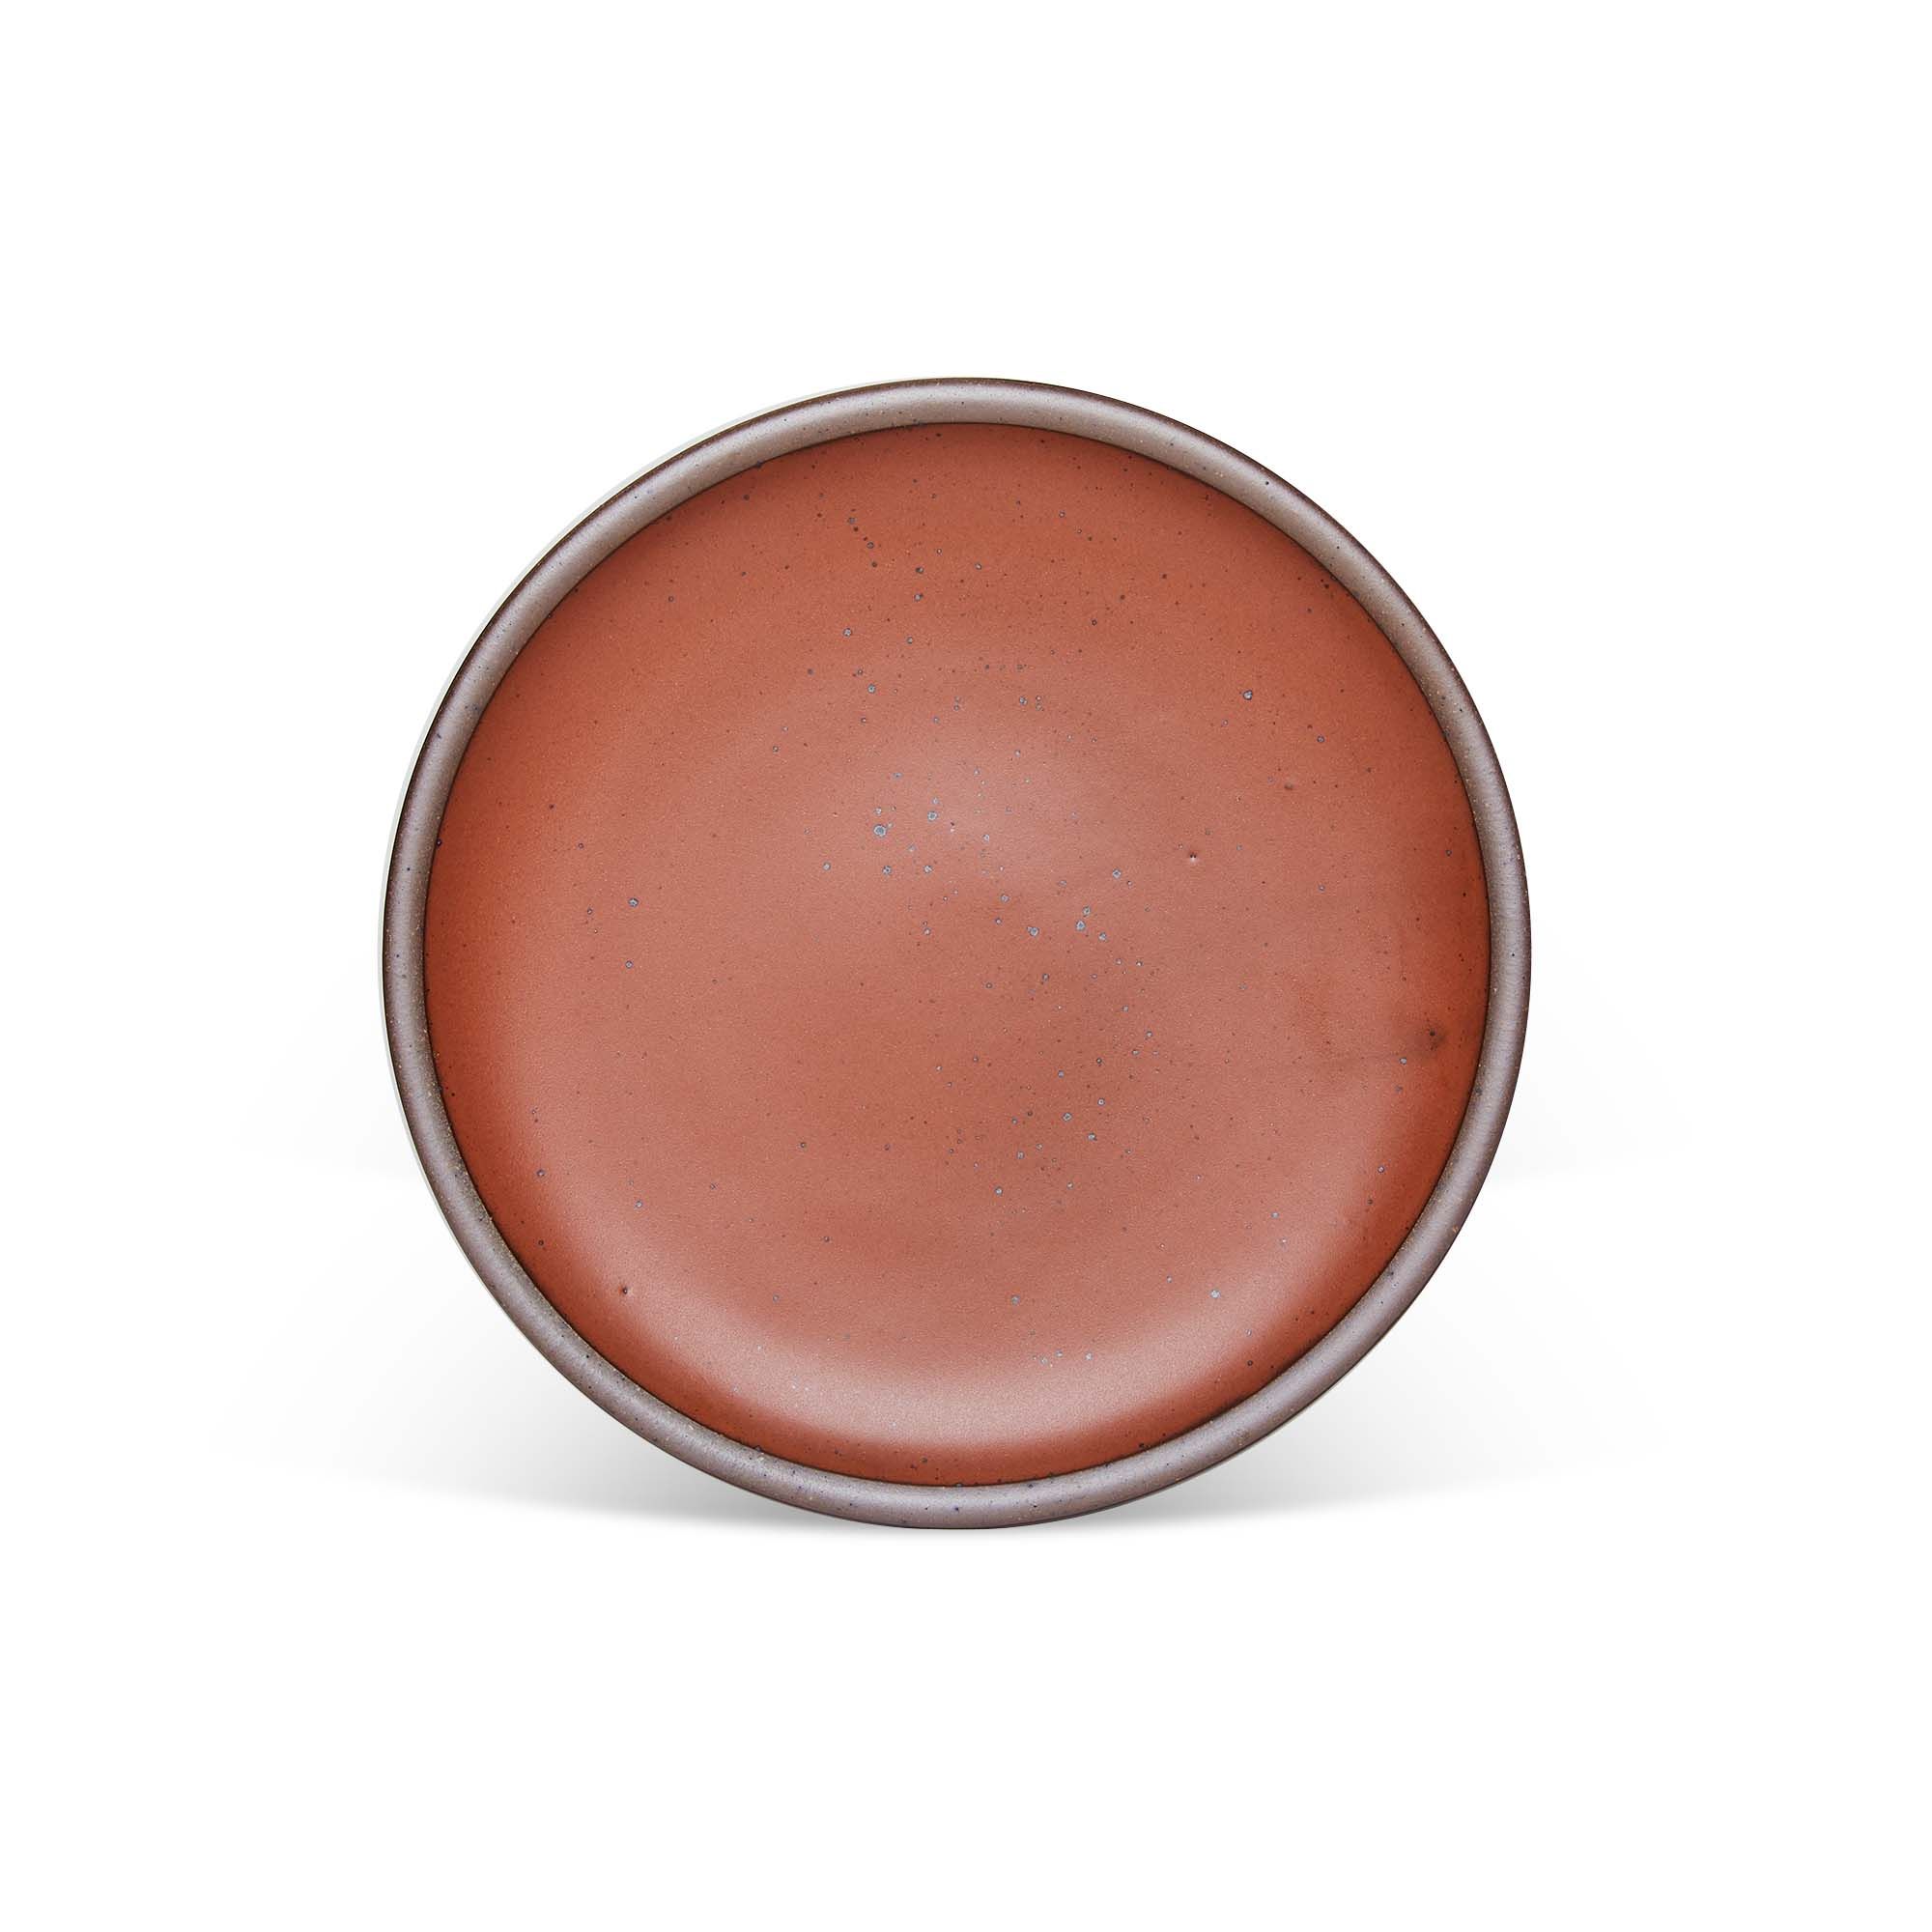 A dinner sized ceramic plate in a cool burnt terracotta color featuring iron speckles and an unglazed rim.